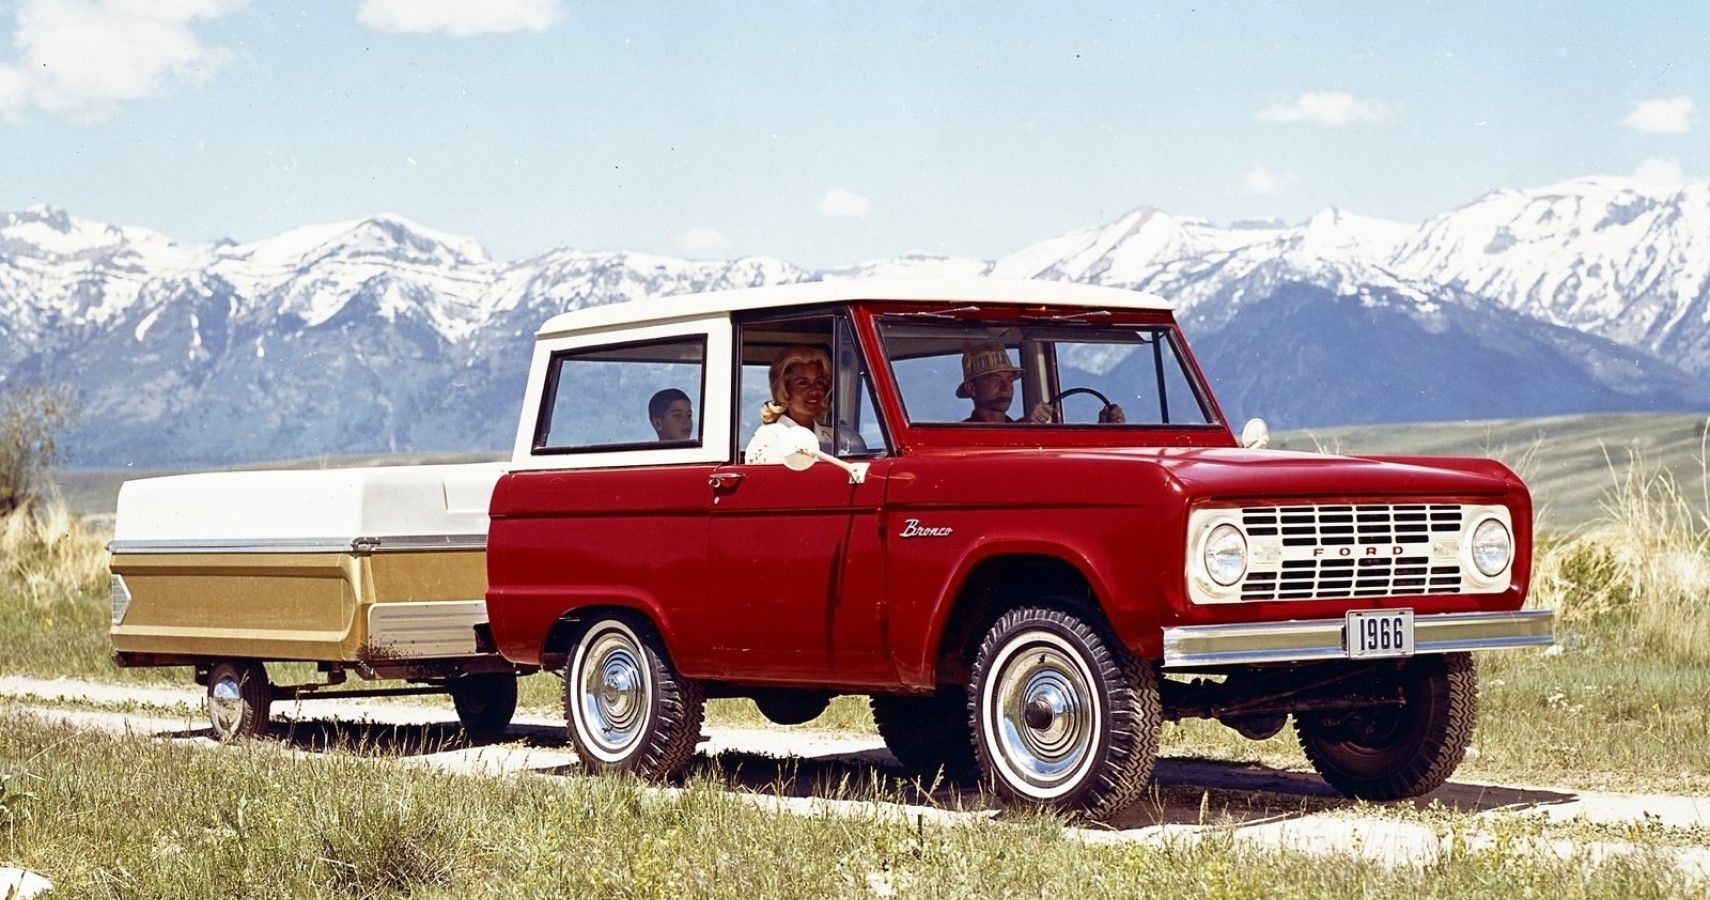 1966 Ford Bronco towing view